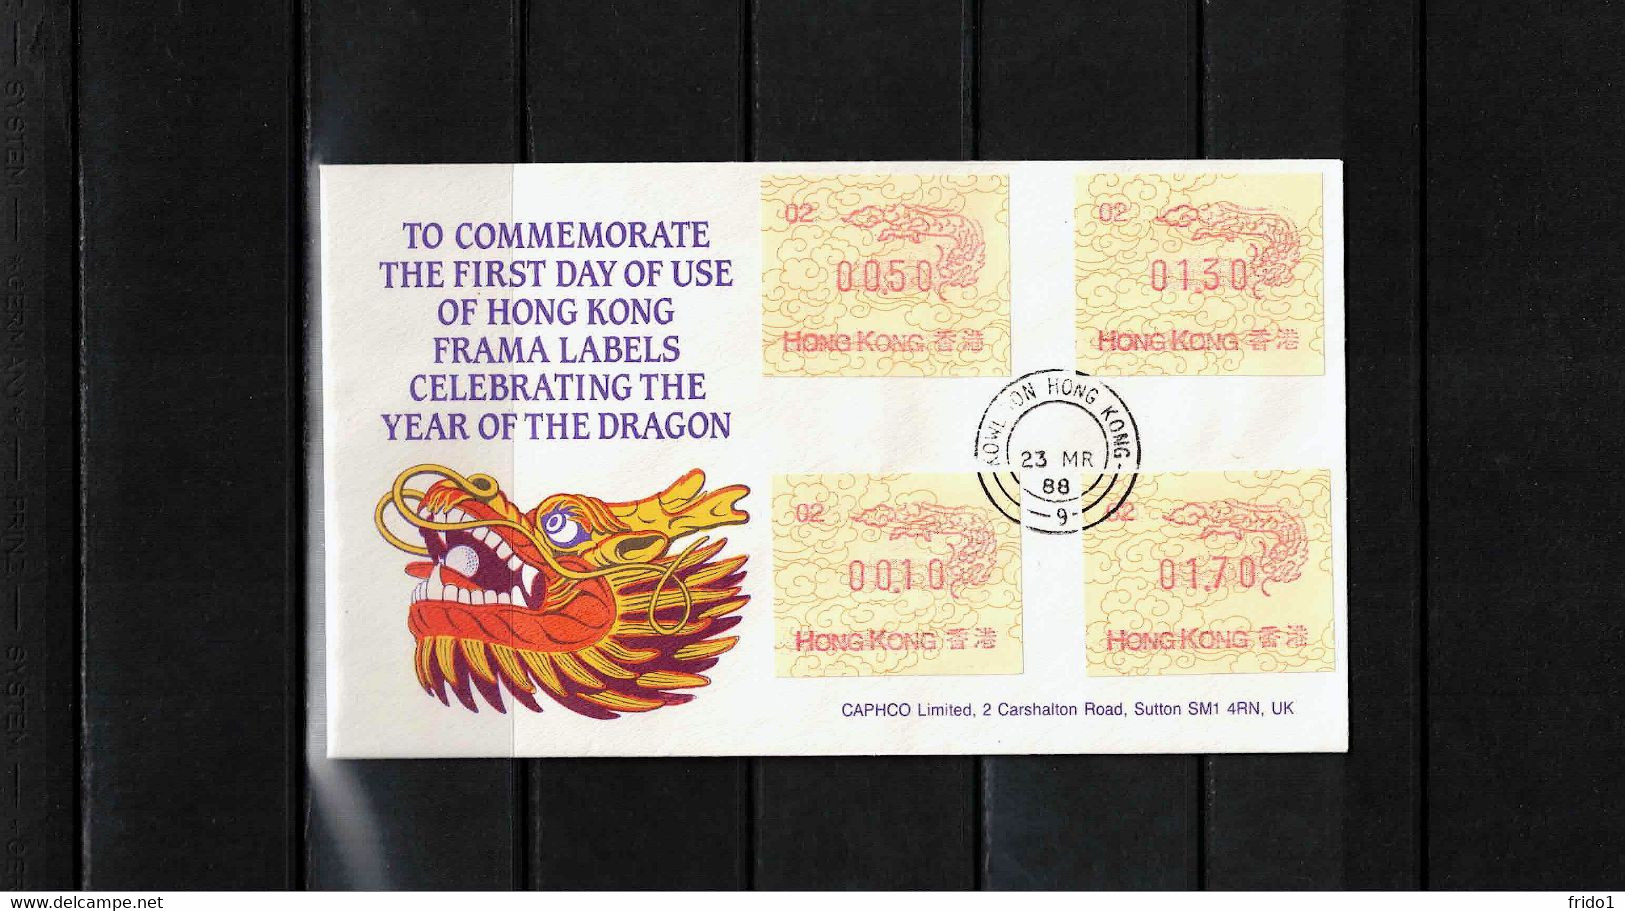 Hong Kong 1988 ATM Frama Labels NR.02 Year Of The Dragon FDC - FDC